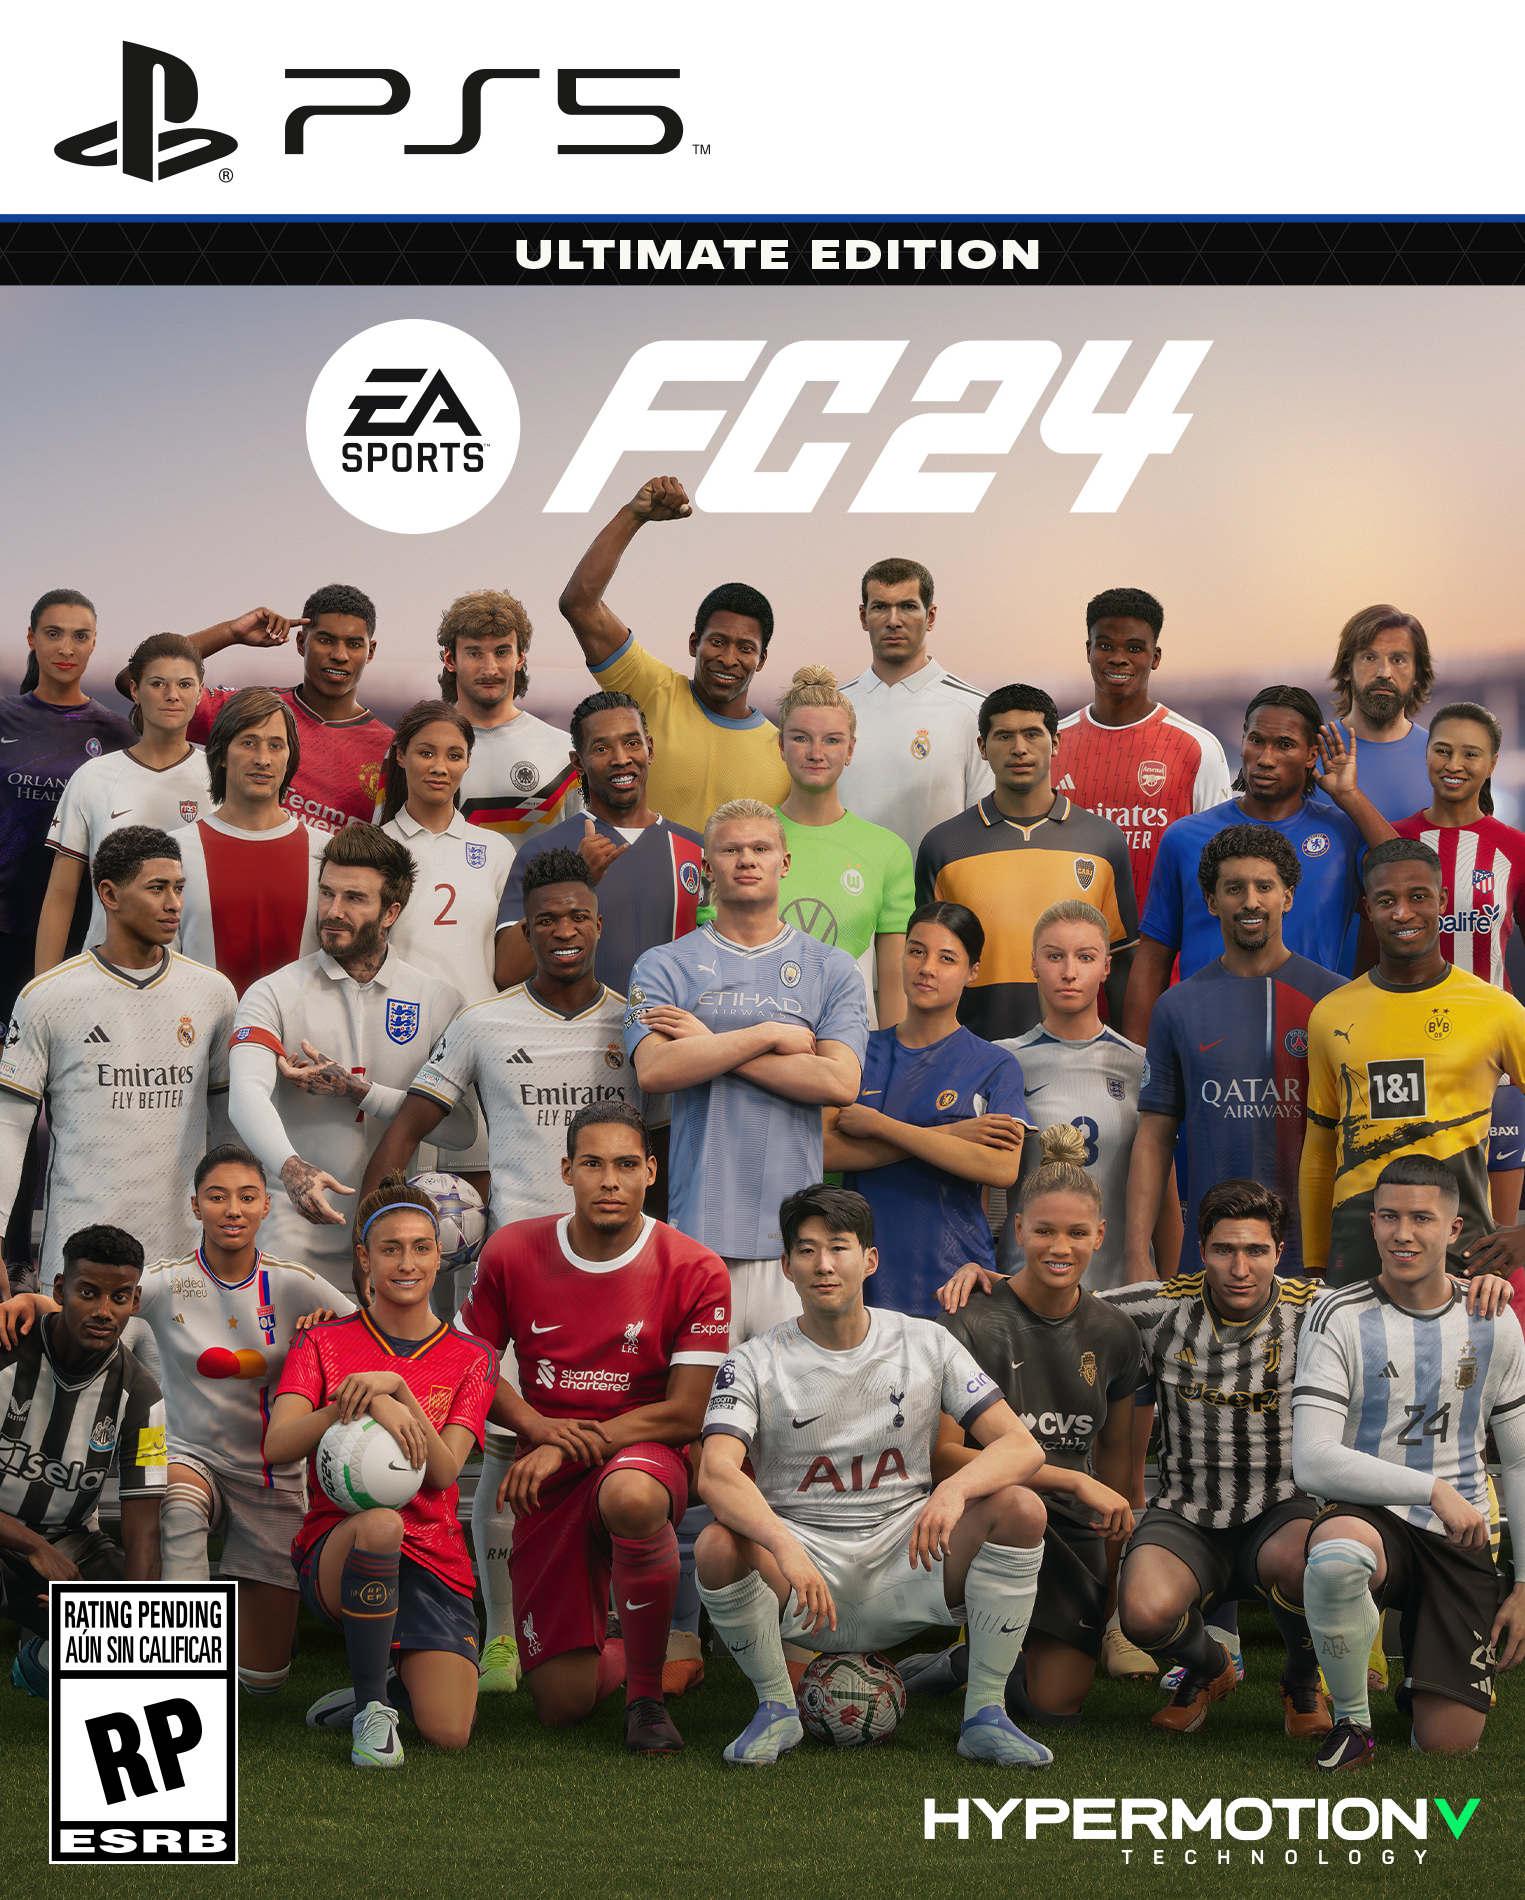 Fifa 24 designs, themes, templates and downloadable graphic